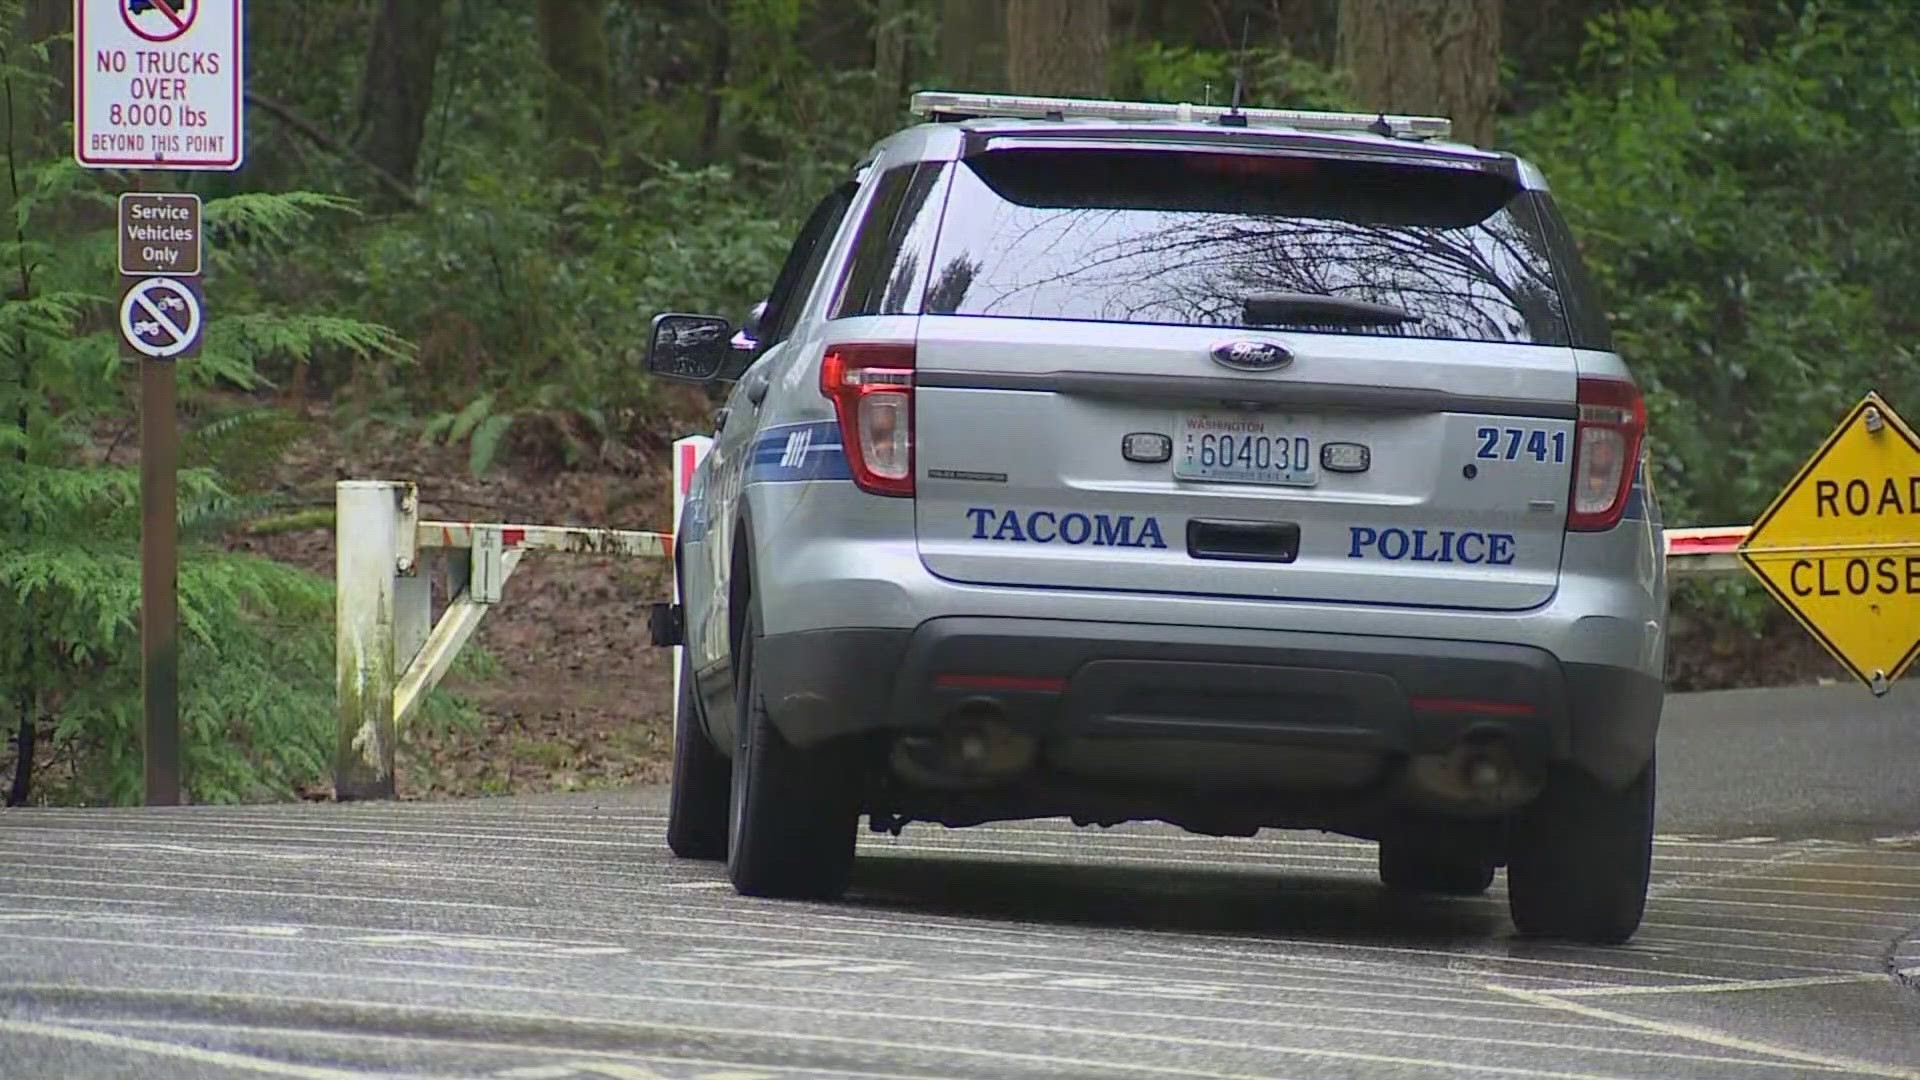 Tacoma police are still searching for the suspect.